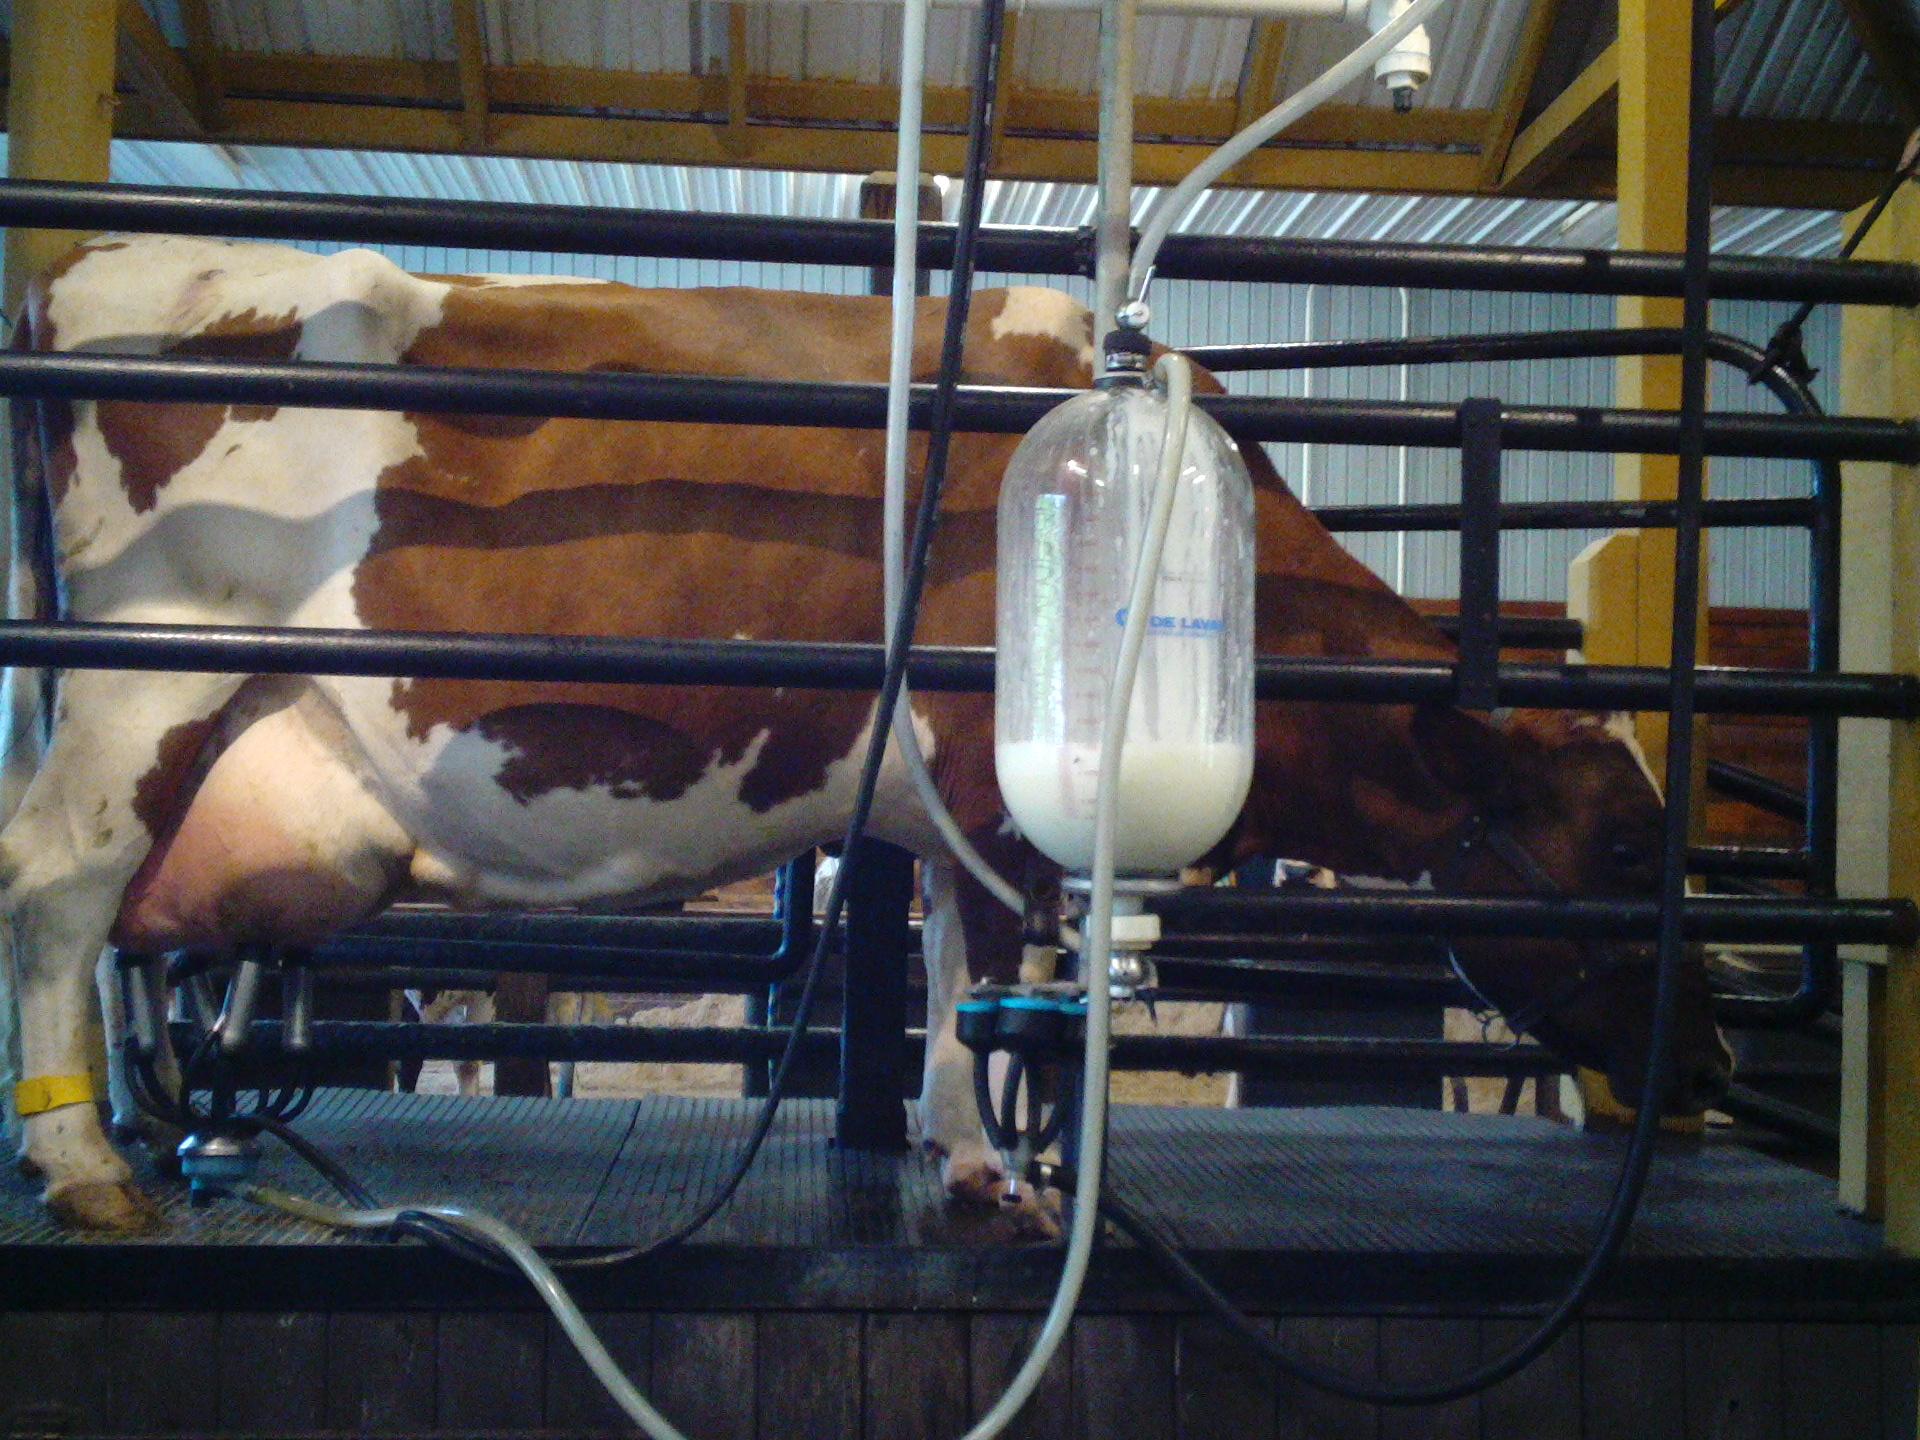 Cow being milked with pump